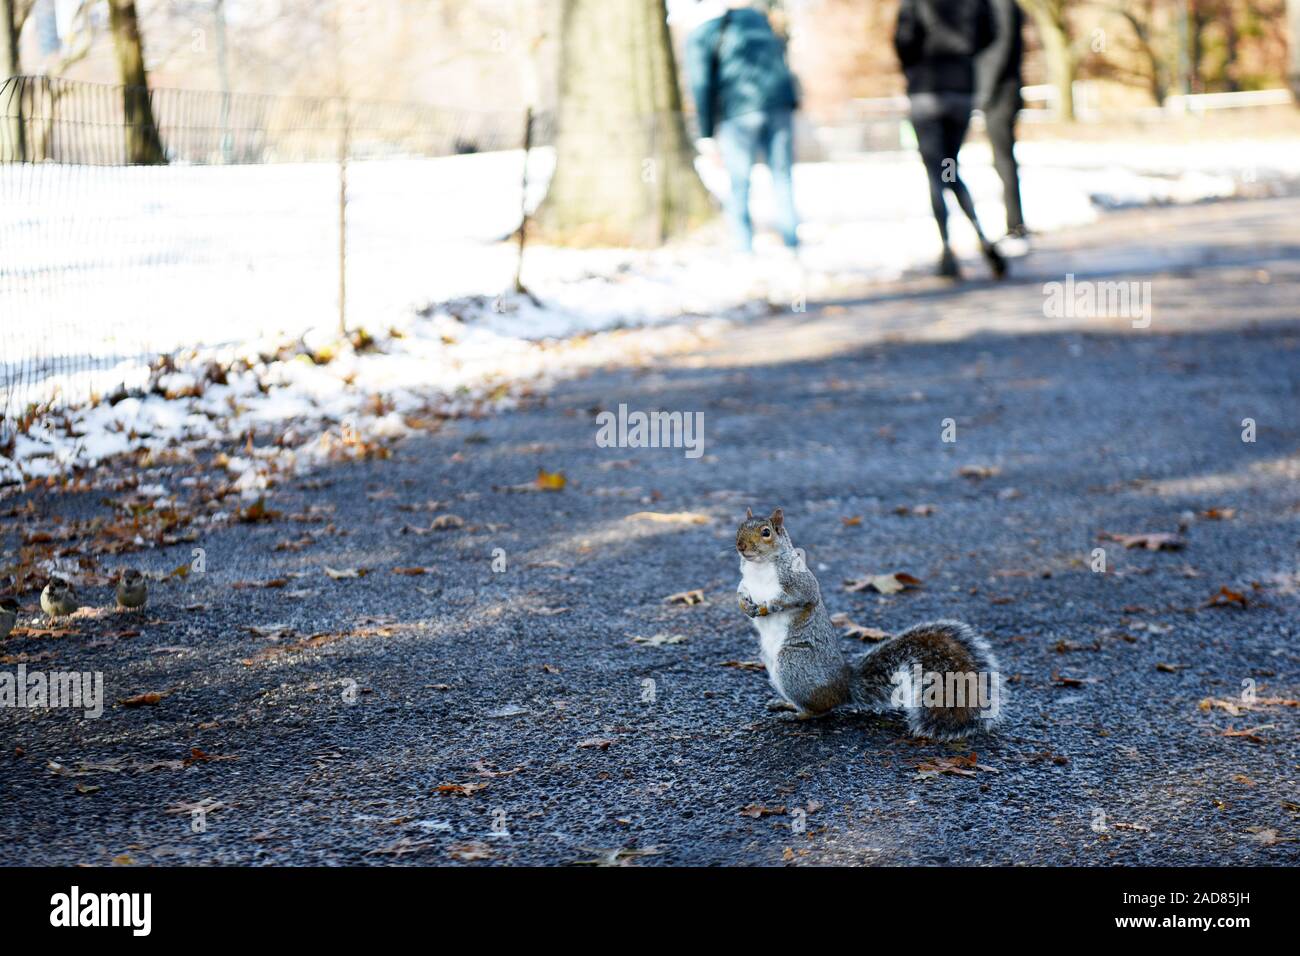 New York, USA. 3rd Dec, 2019. A squirrel is pictured after a snowfall in Central Park in New York, the United States, on Dec. 3, 2019. The first snowfall of the season hit New York City on Monday. Credit: Han Fang/Xinhua/Alamy Live News Stock Photo